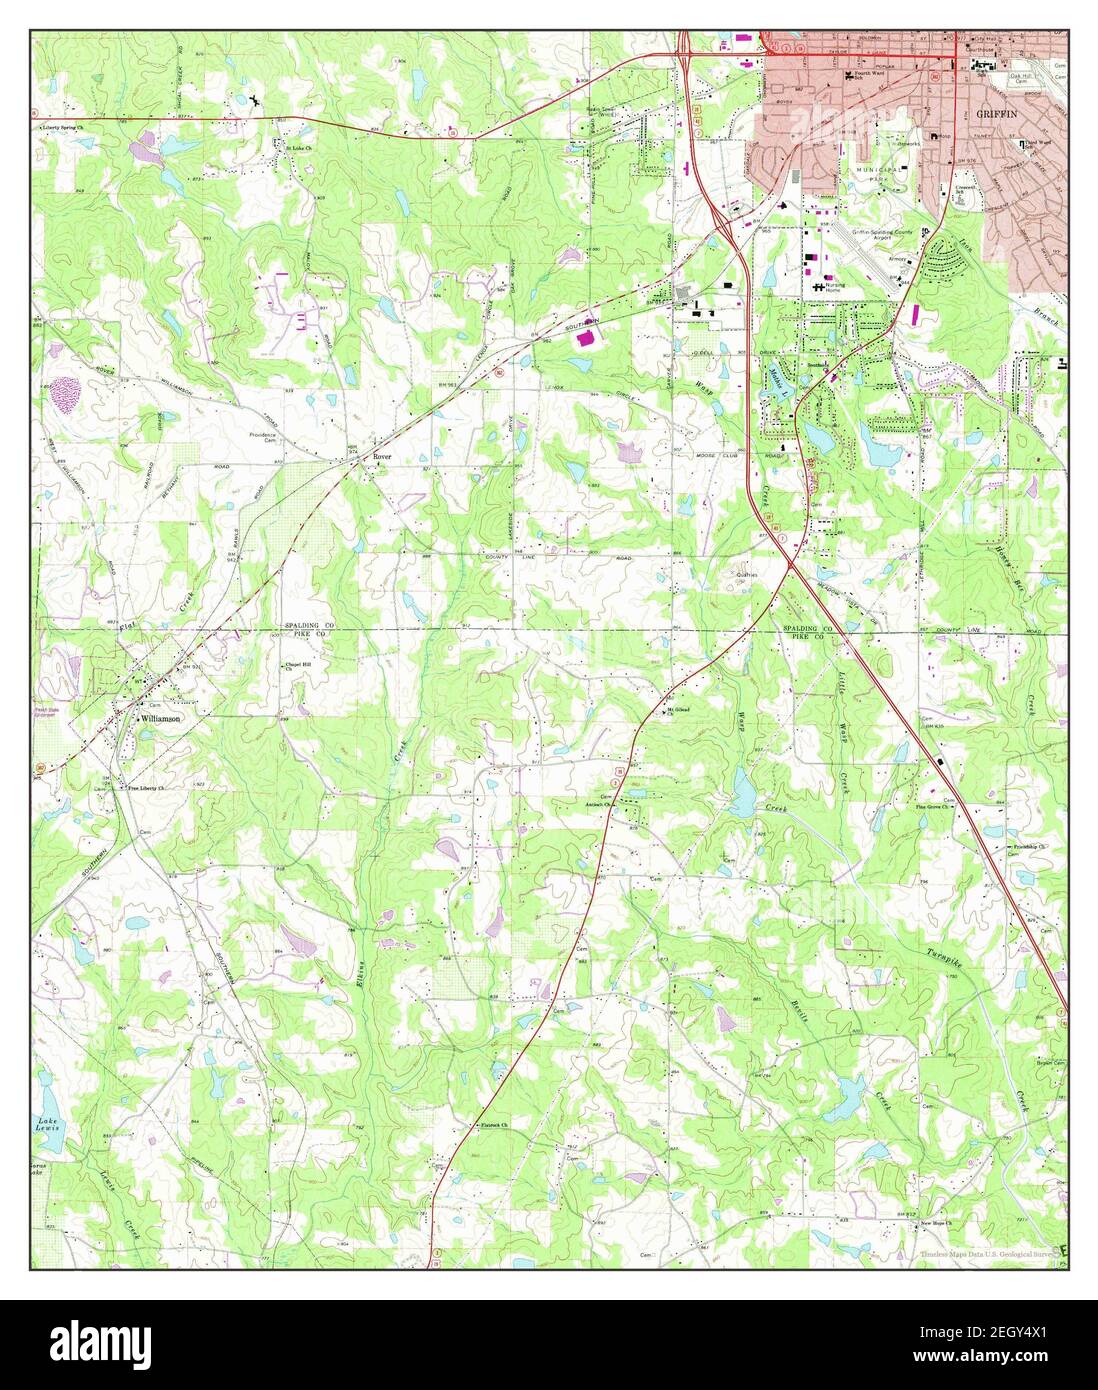 Griffin South, Georgia, map 1971, 1:24000, United States of America by Timeless Maps, data U.S. Geological Survey Stock Photo